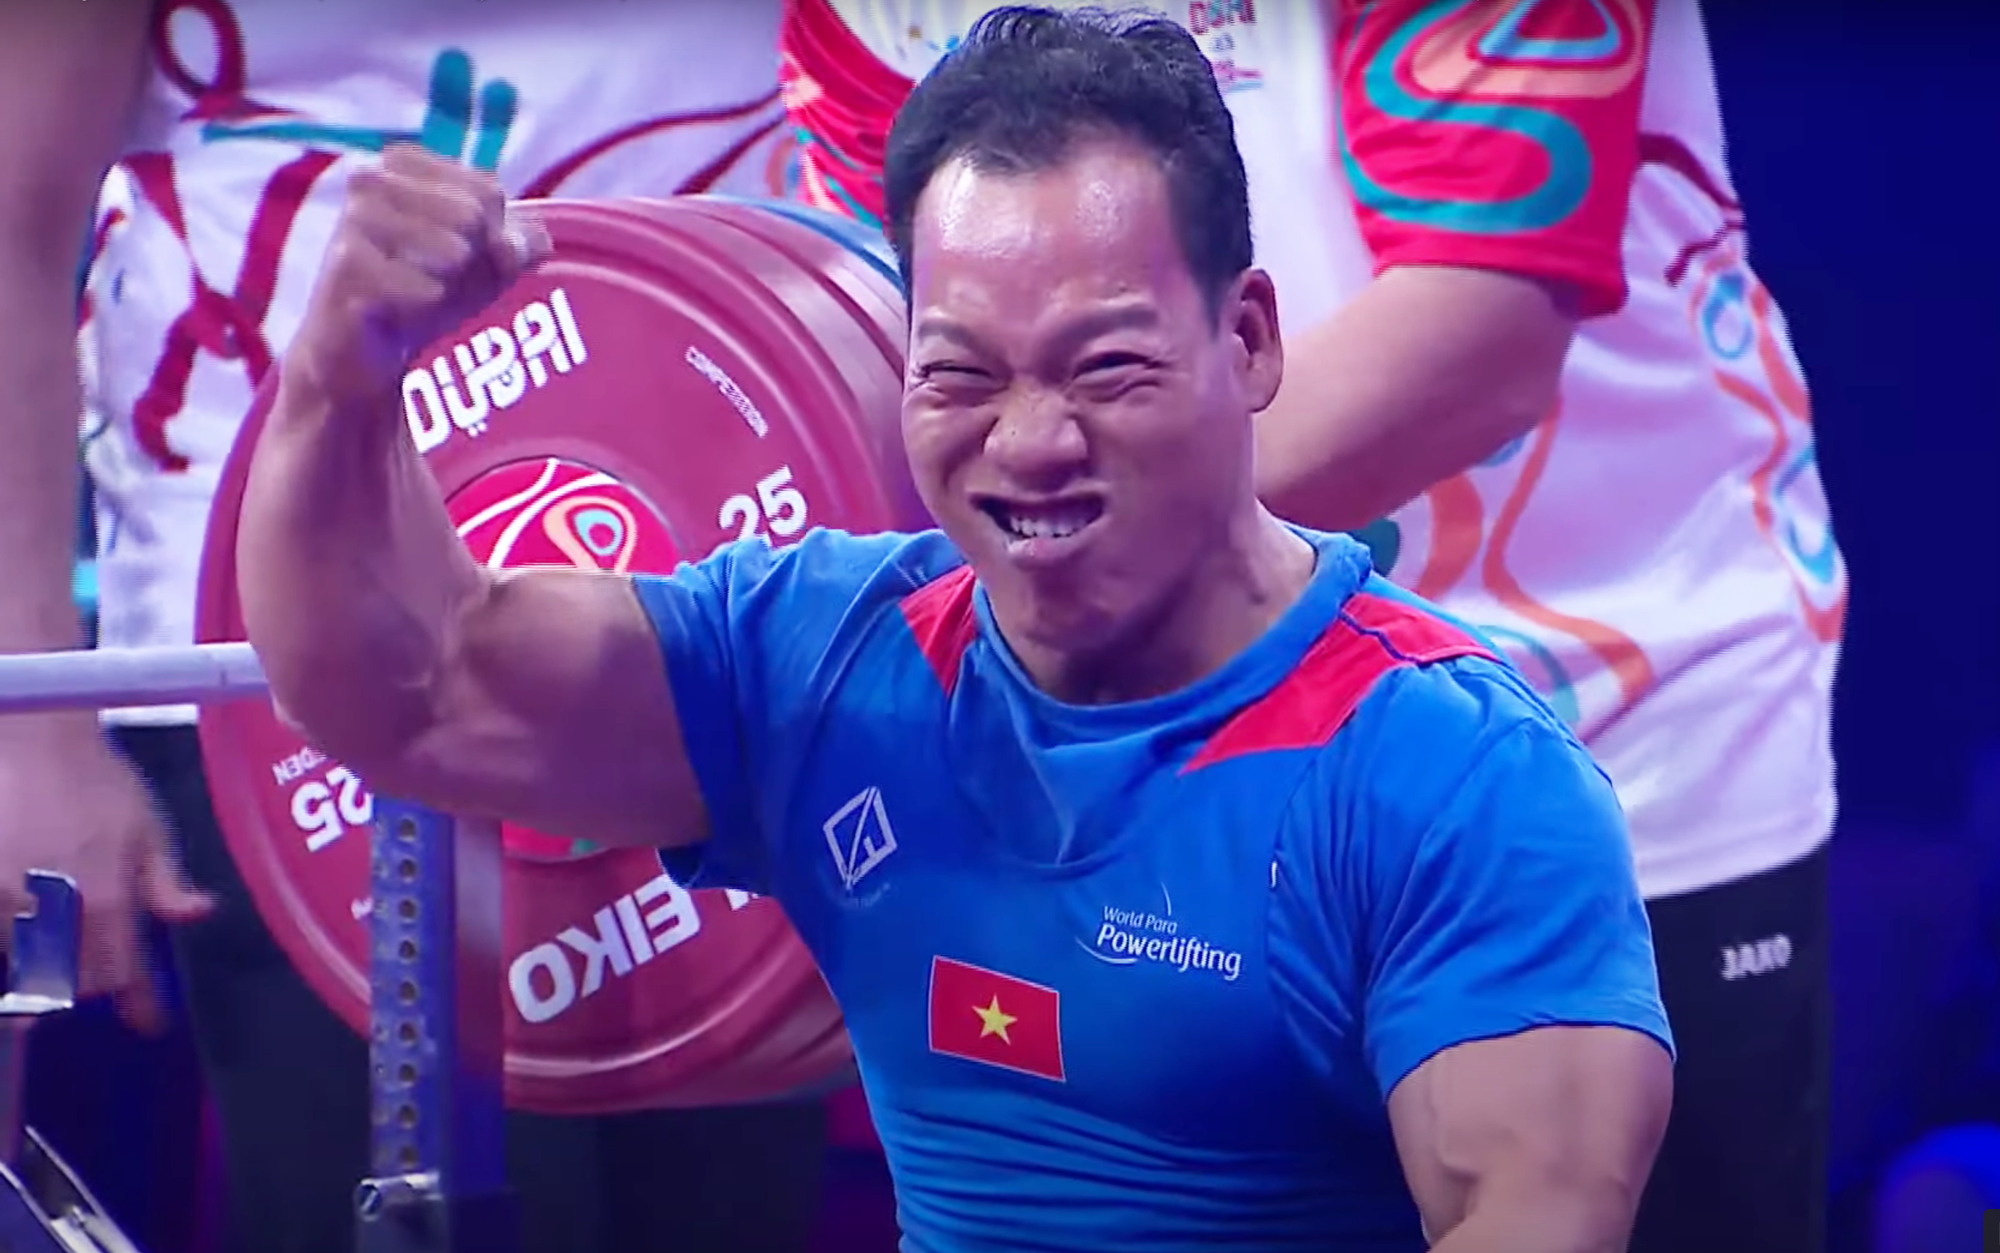 Vietnamese weightlifter Le Van Cong celebrates his performance at the 2023 World Para Powerlifting Championships. Photo: IPC